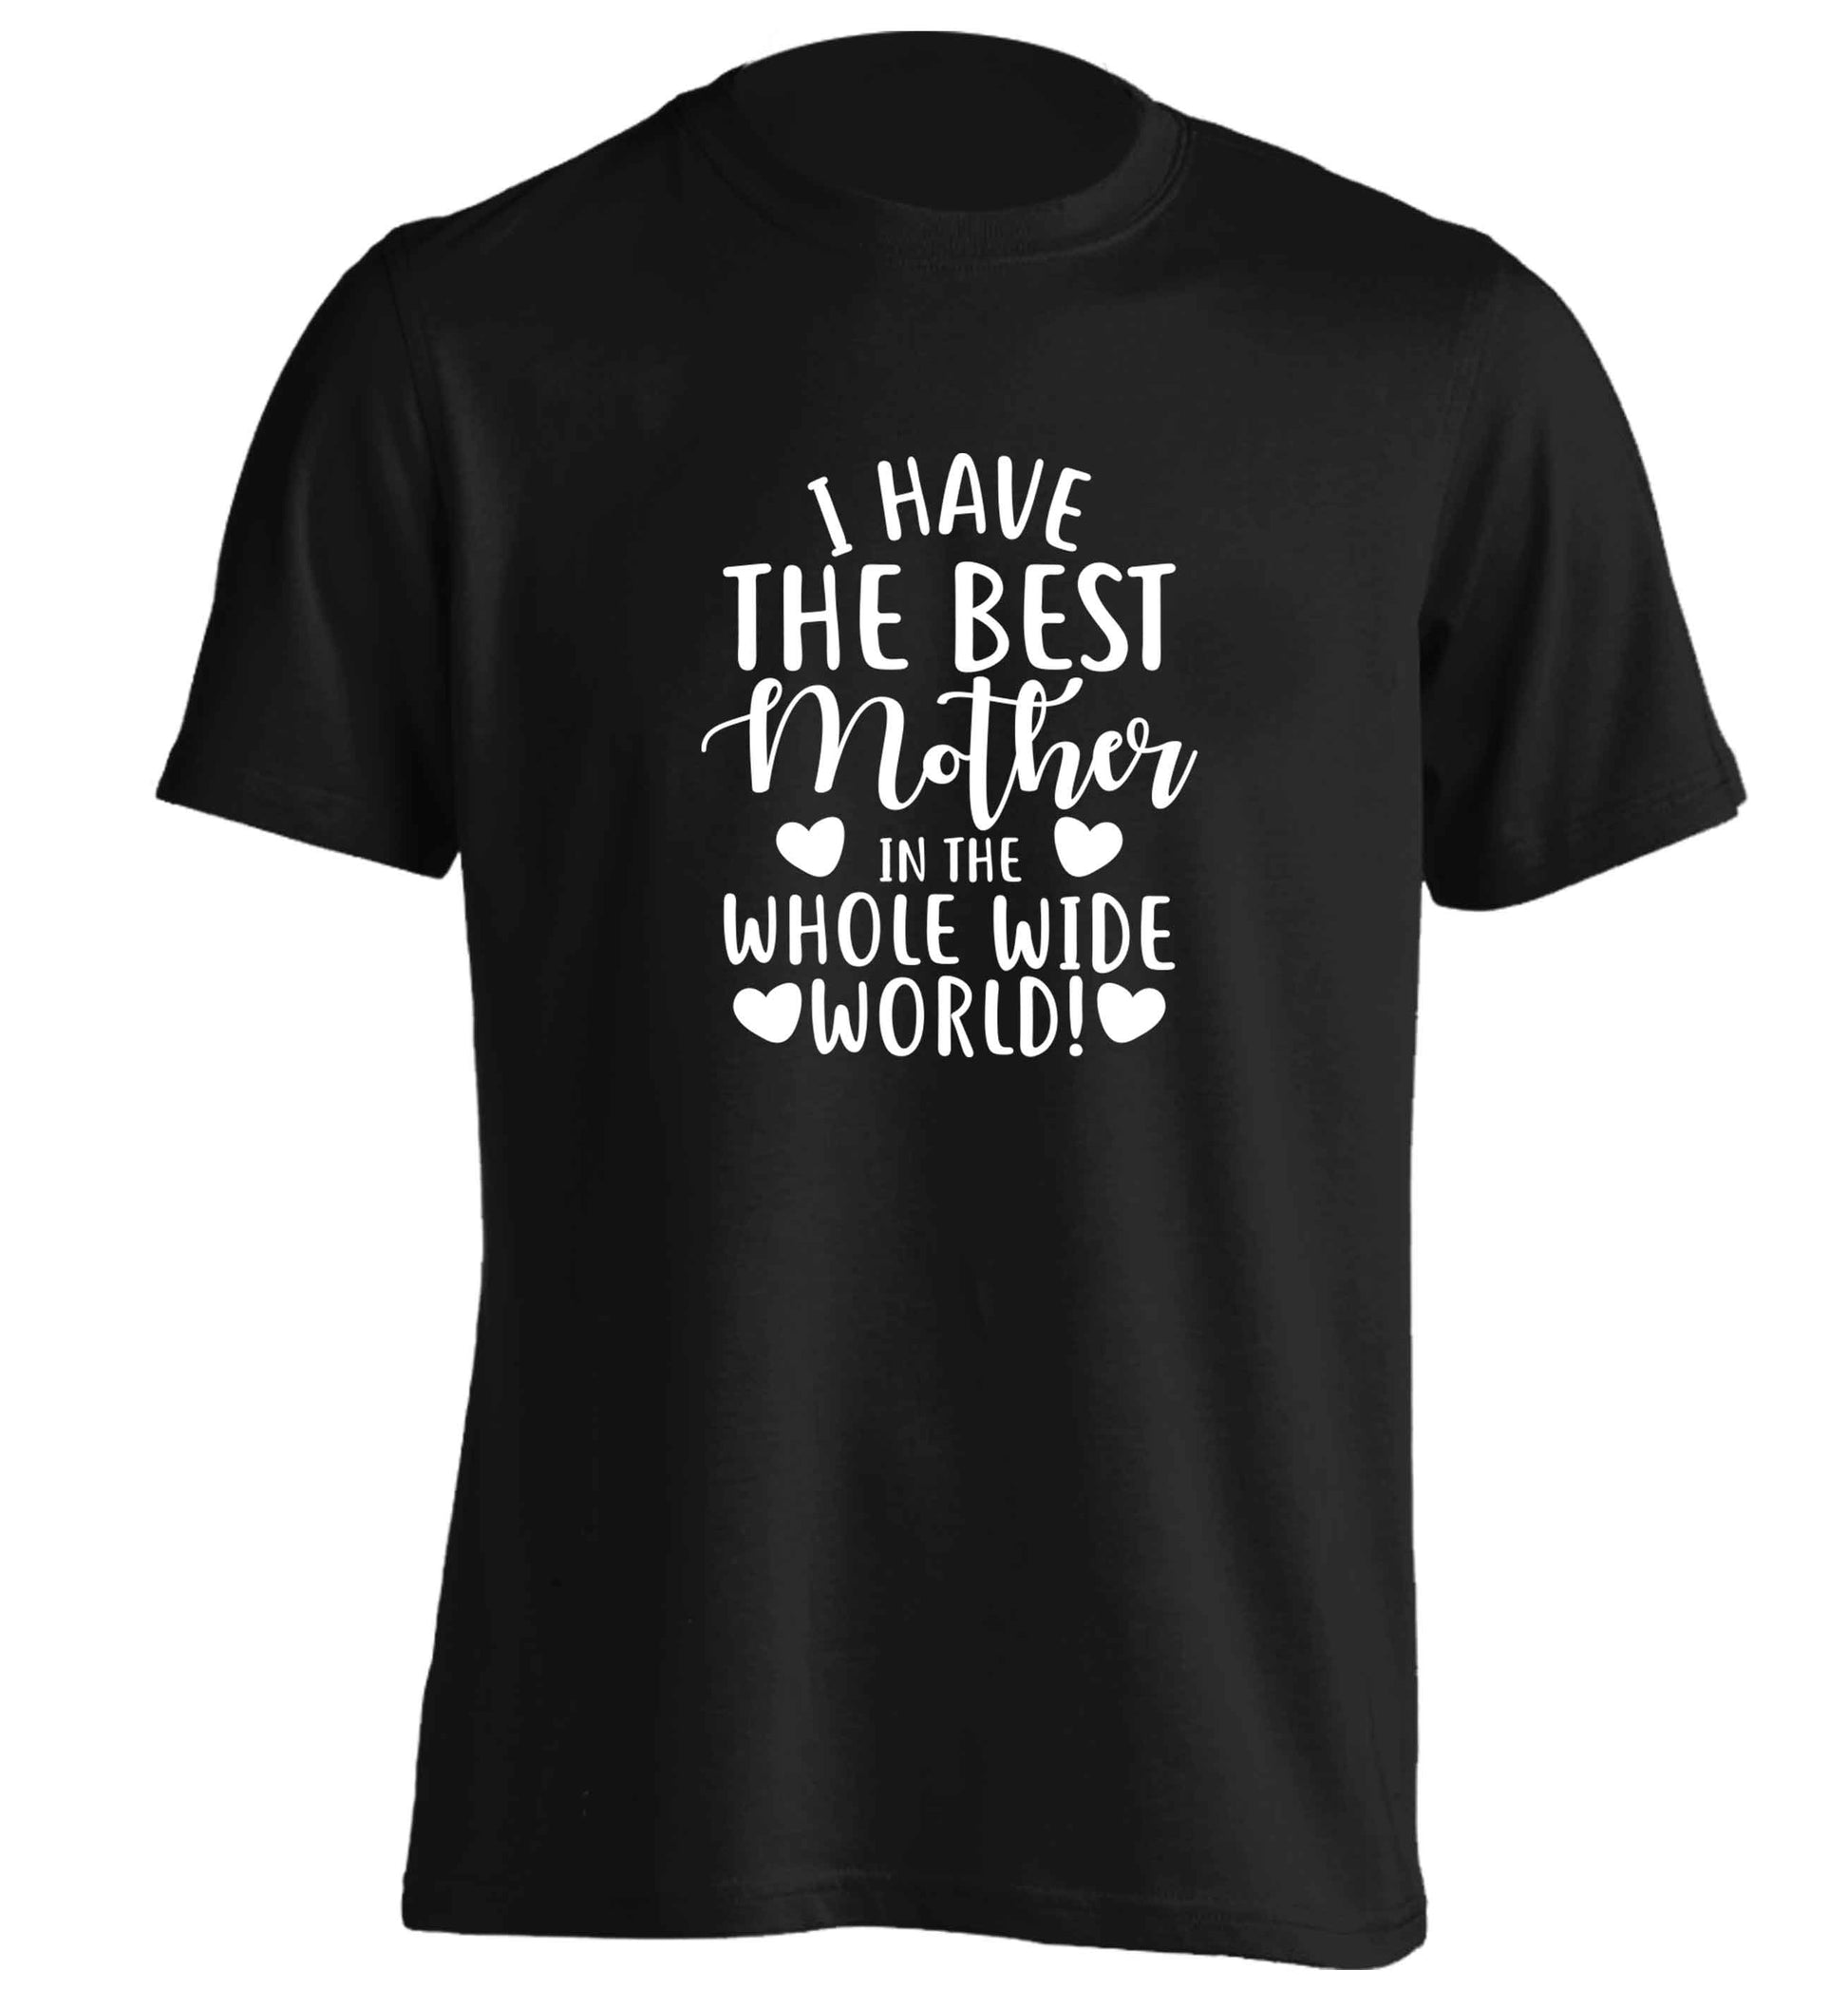 I have the best mother in the whole wide world adults unisex black Tshirt 2XL